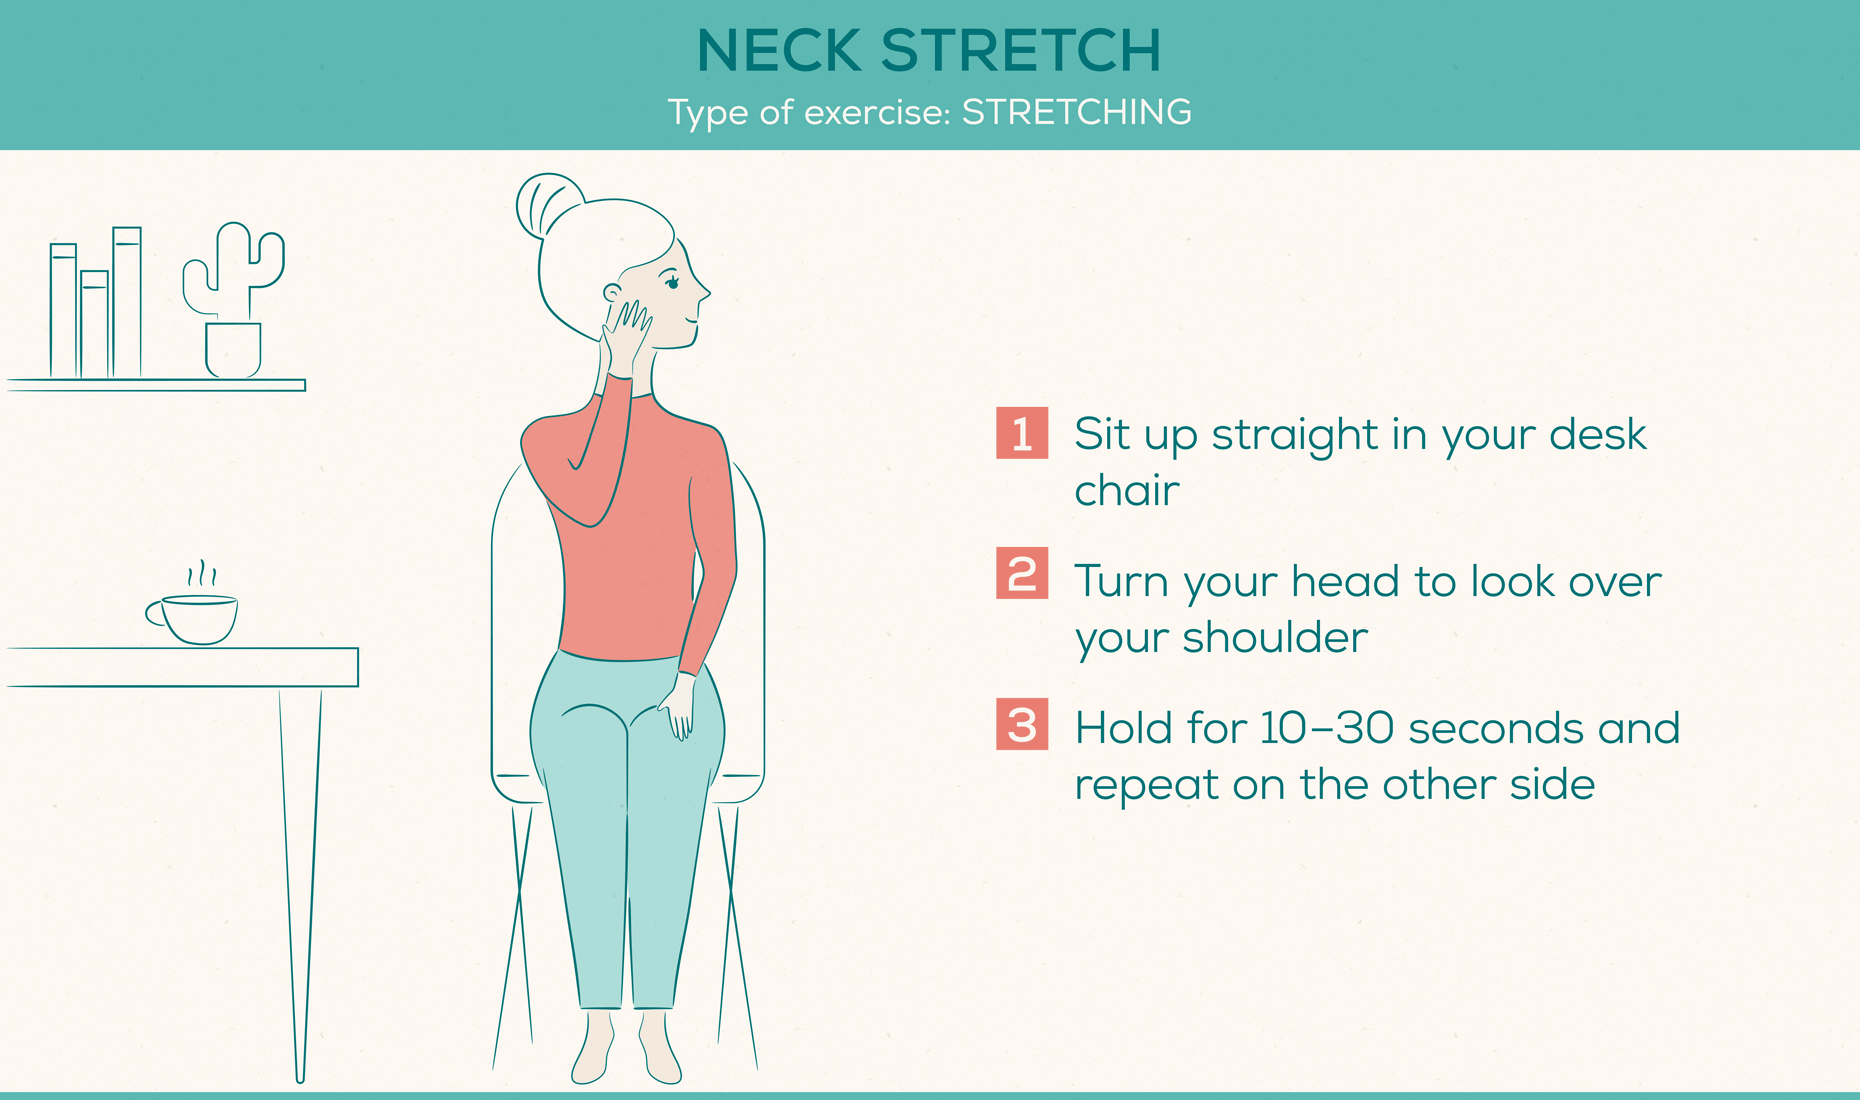 heart-healthy-exercises-neck-stretch